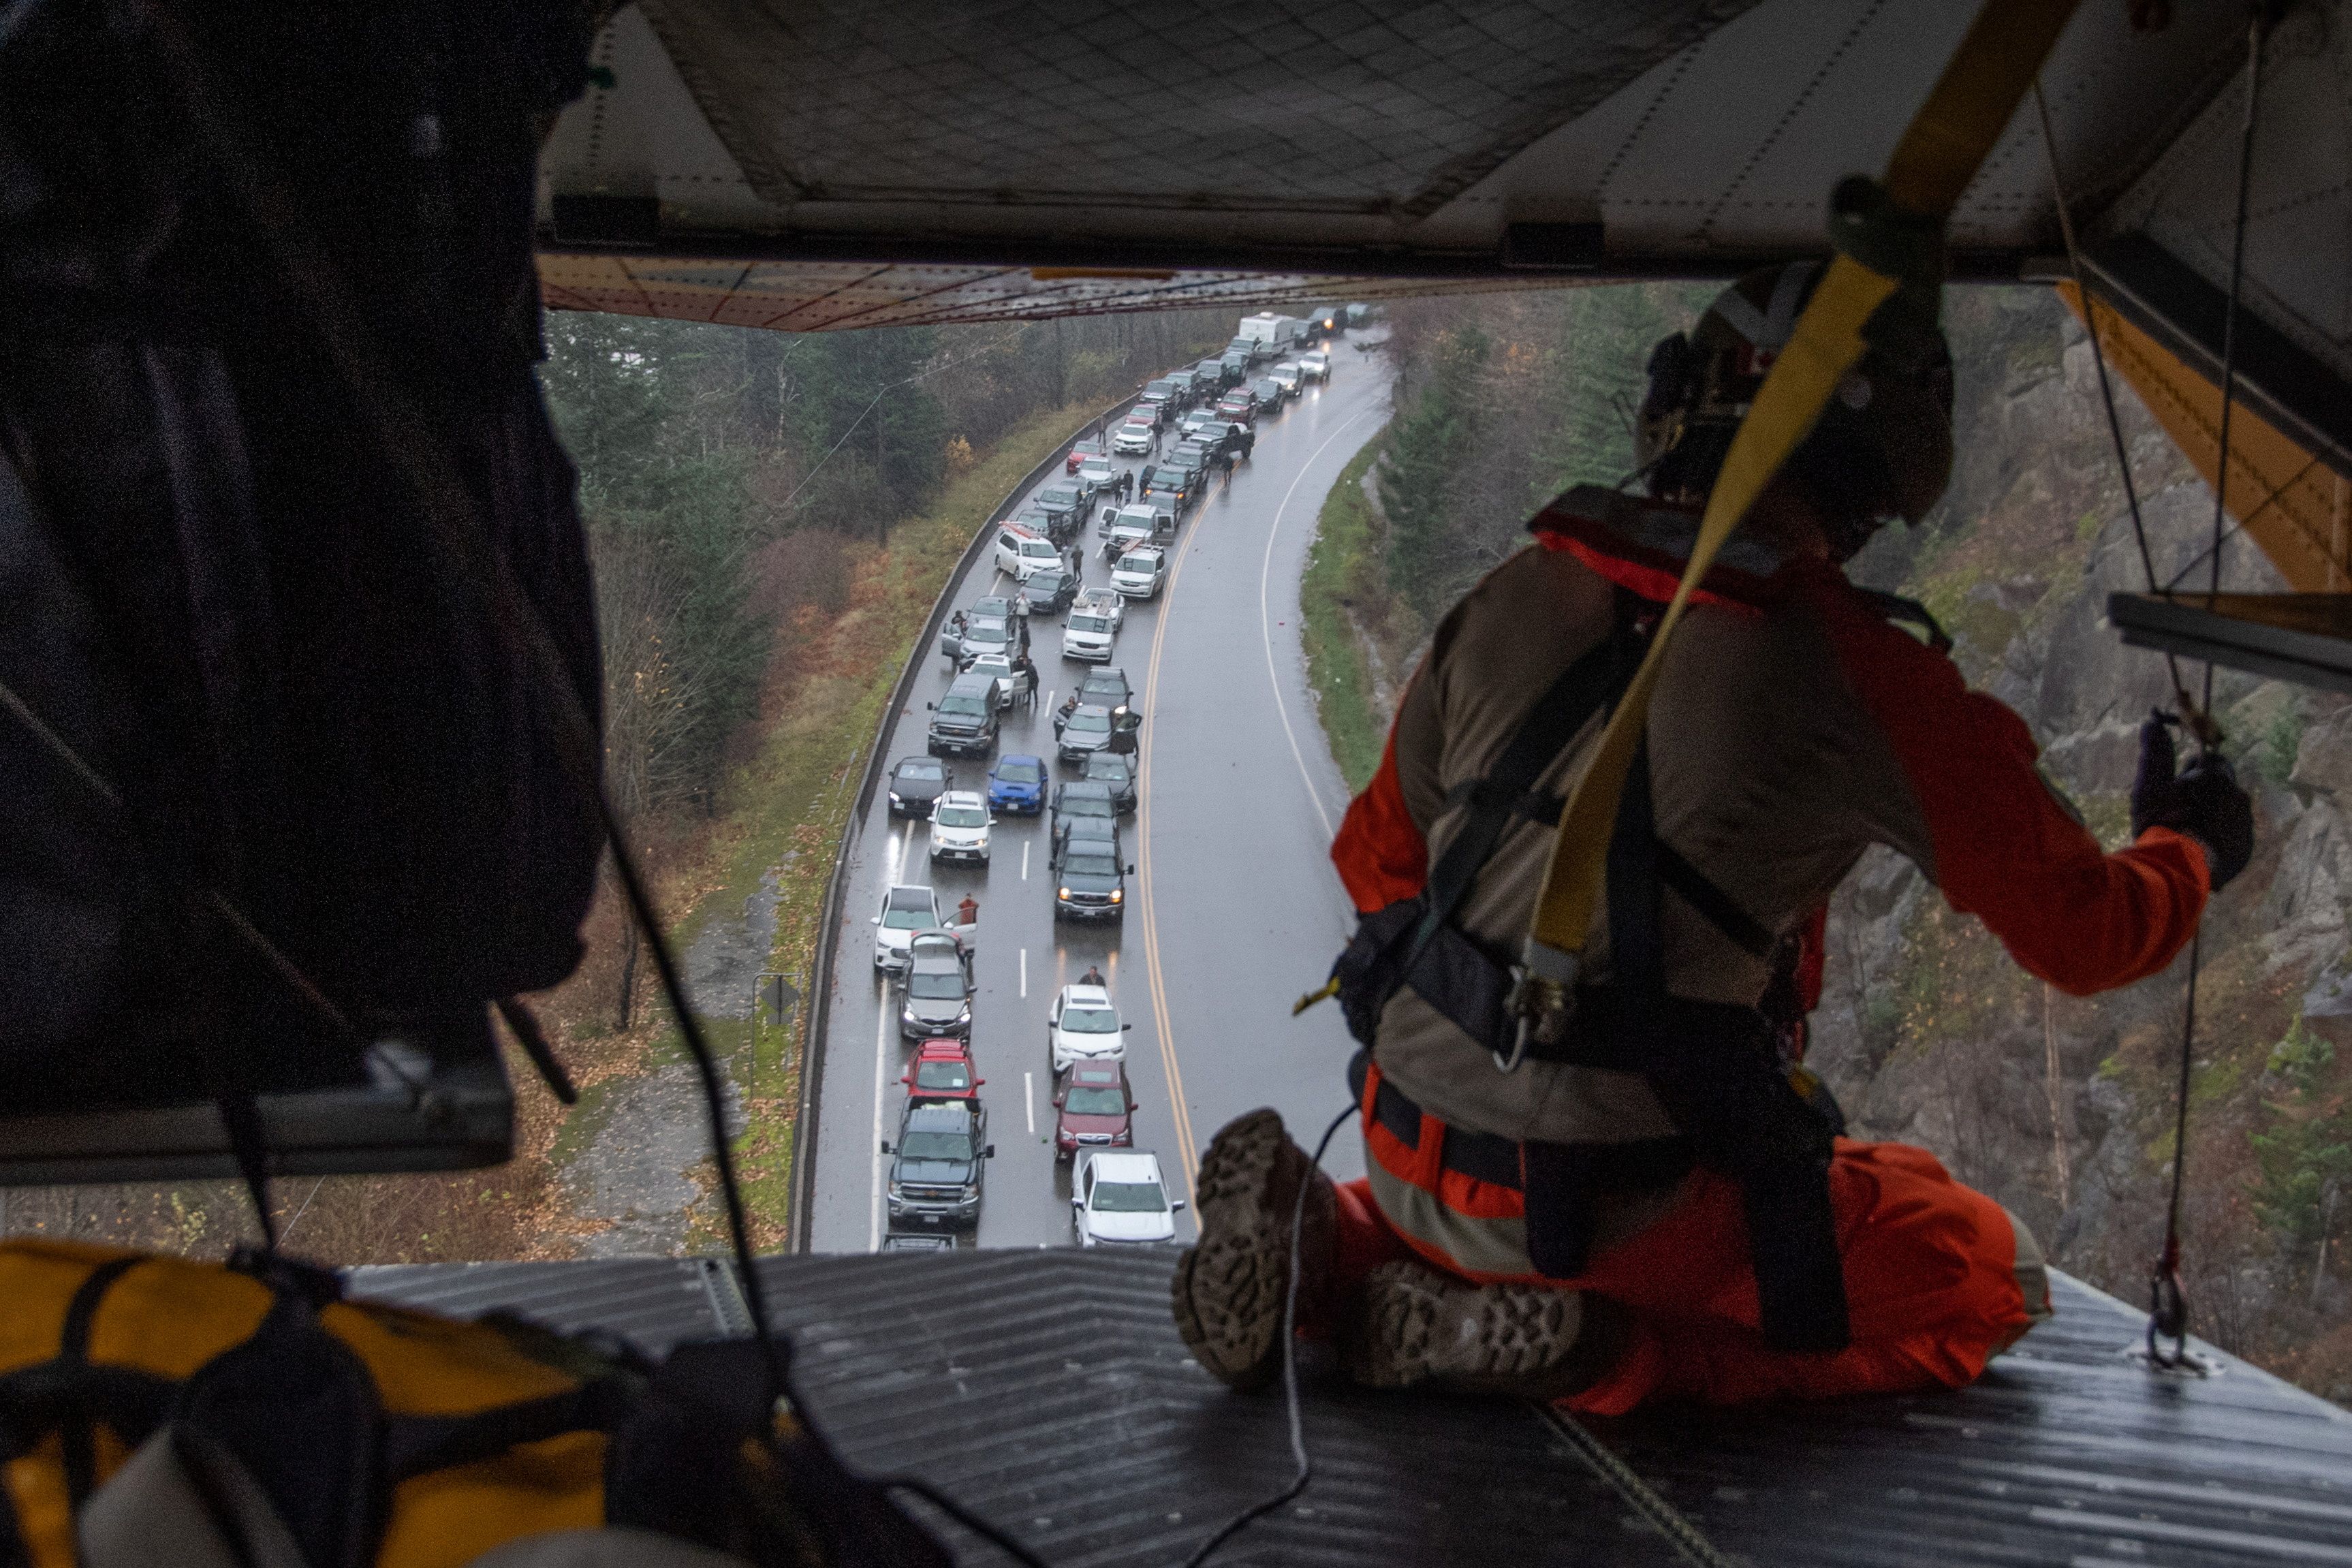 A crew member from a Royal Canadian Air Force 442 Squadron CH-149 Cormorant helicopter views a line of vehicles during the rescue of over 300 motorists stranded by mudslides, in Agassiz, British Columbia, Canada November 15, 2021.  RCAF/Handout via REUTERS 